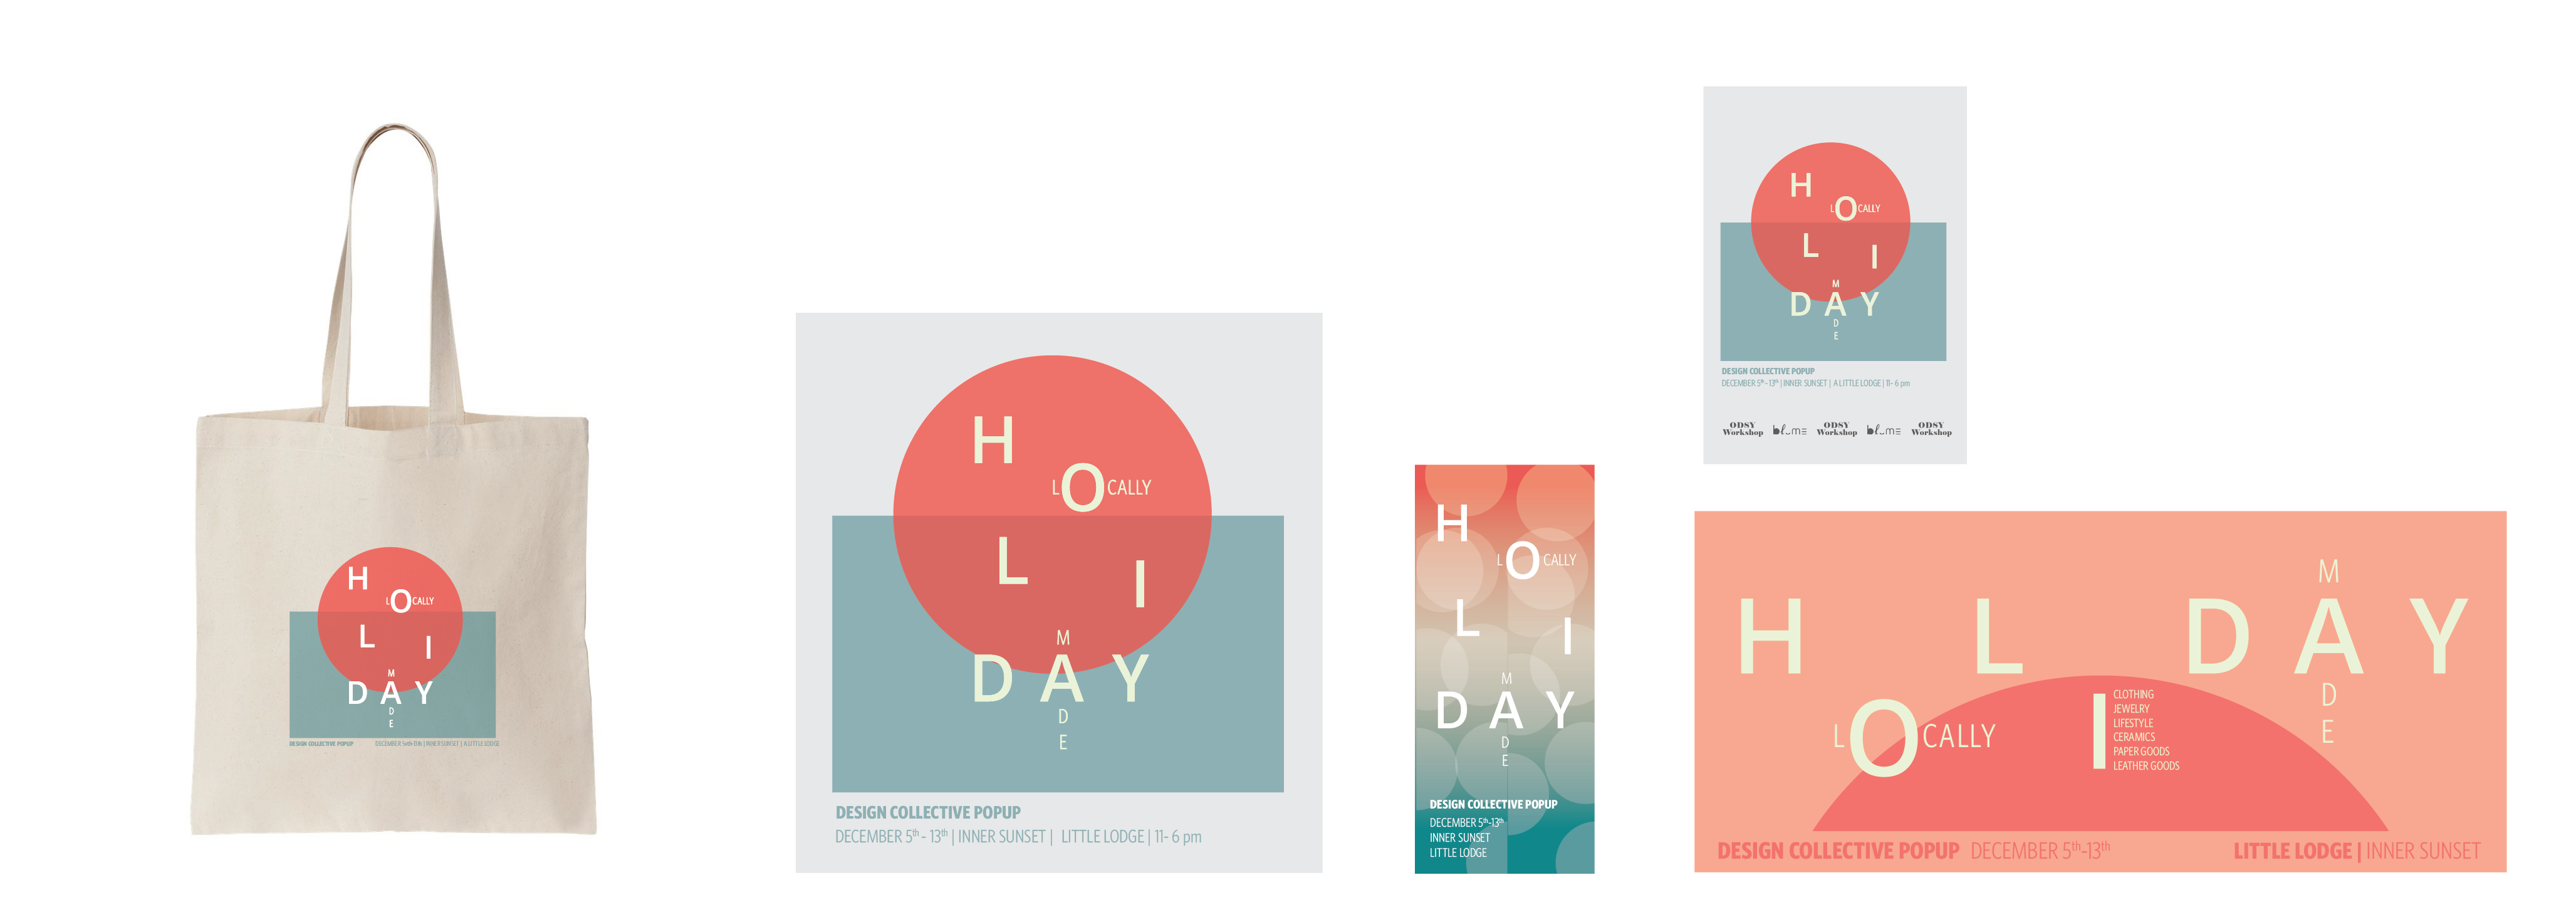 Holiday Design Collective